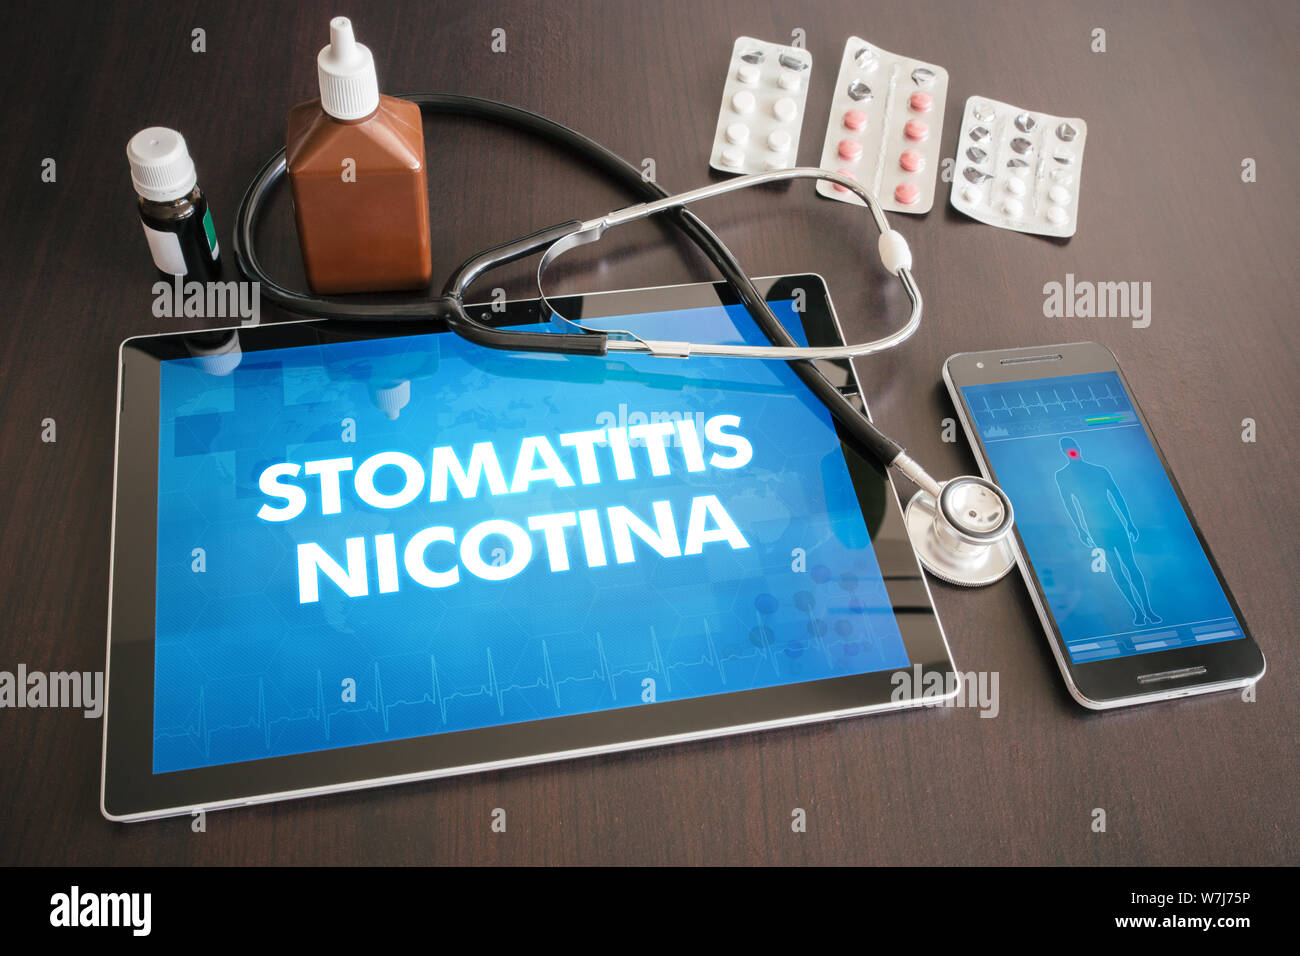 Stomatitis nicotina (cutaneous disease) diagnosis medical concept on tablet screen with stethoscope. Stock Photo